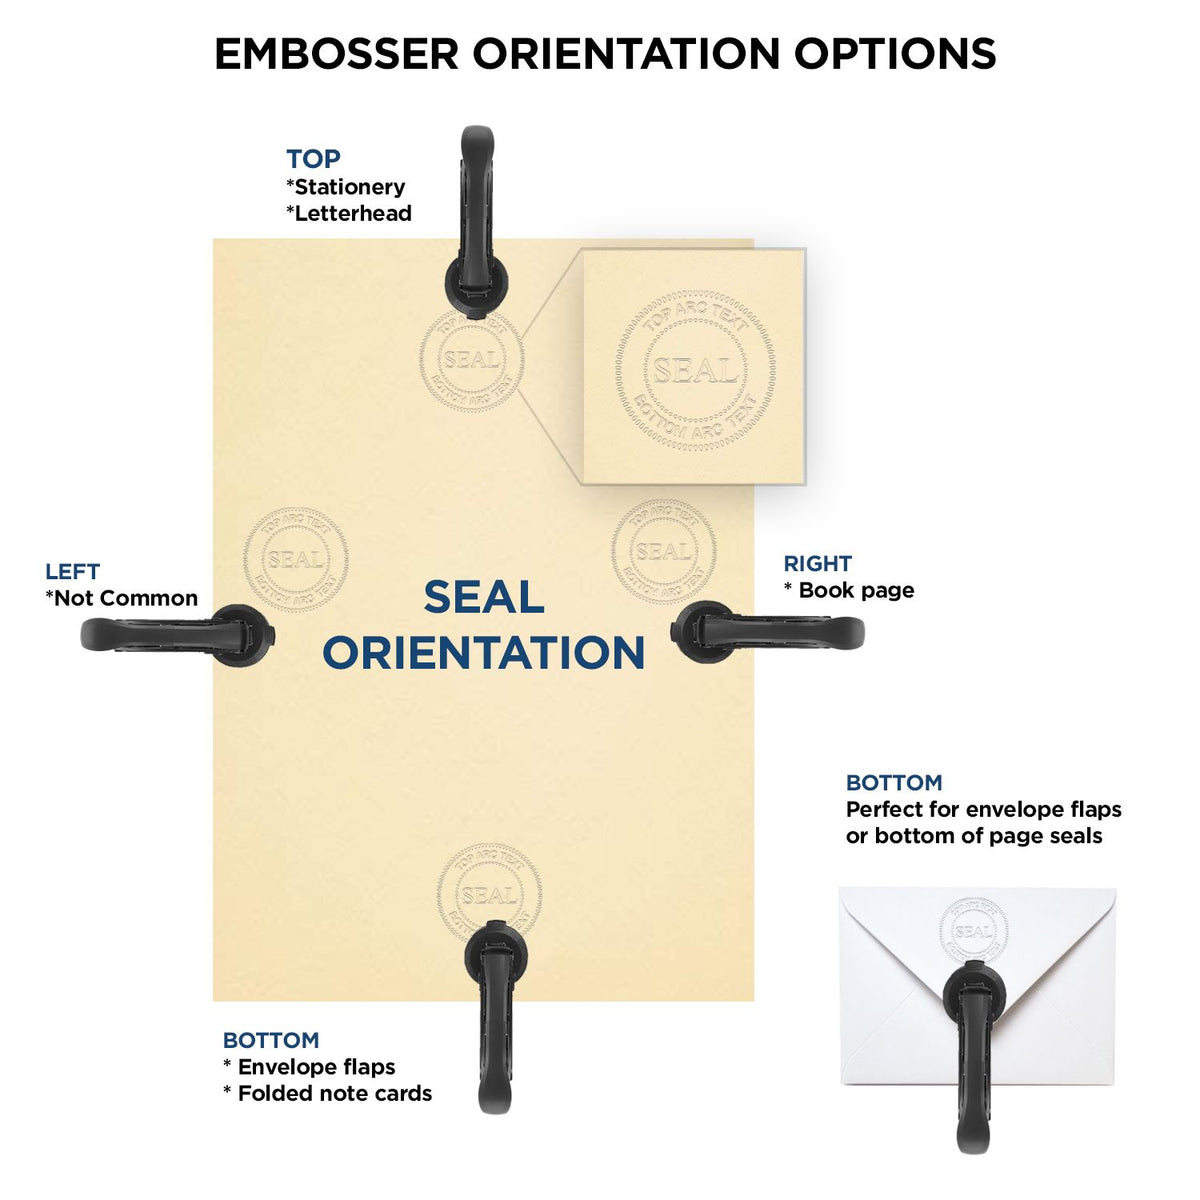 An infographic for the Handheld South Dakota Professional Engineer Embosser showing embosser orientation, this is showing examples of a top, bottom, right and left insert.